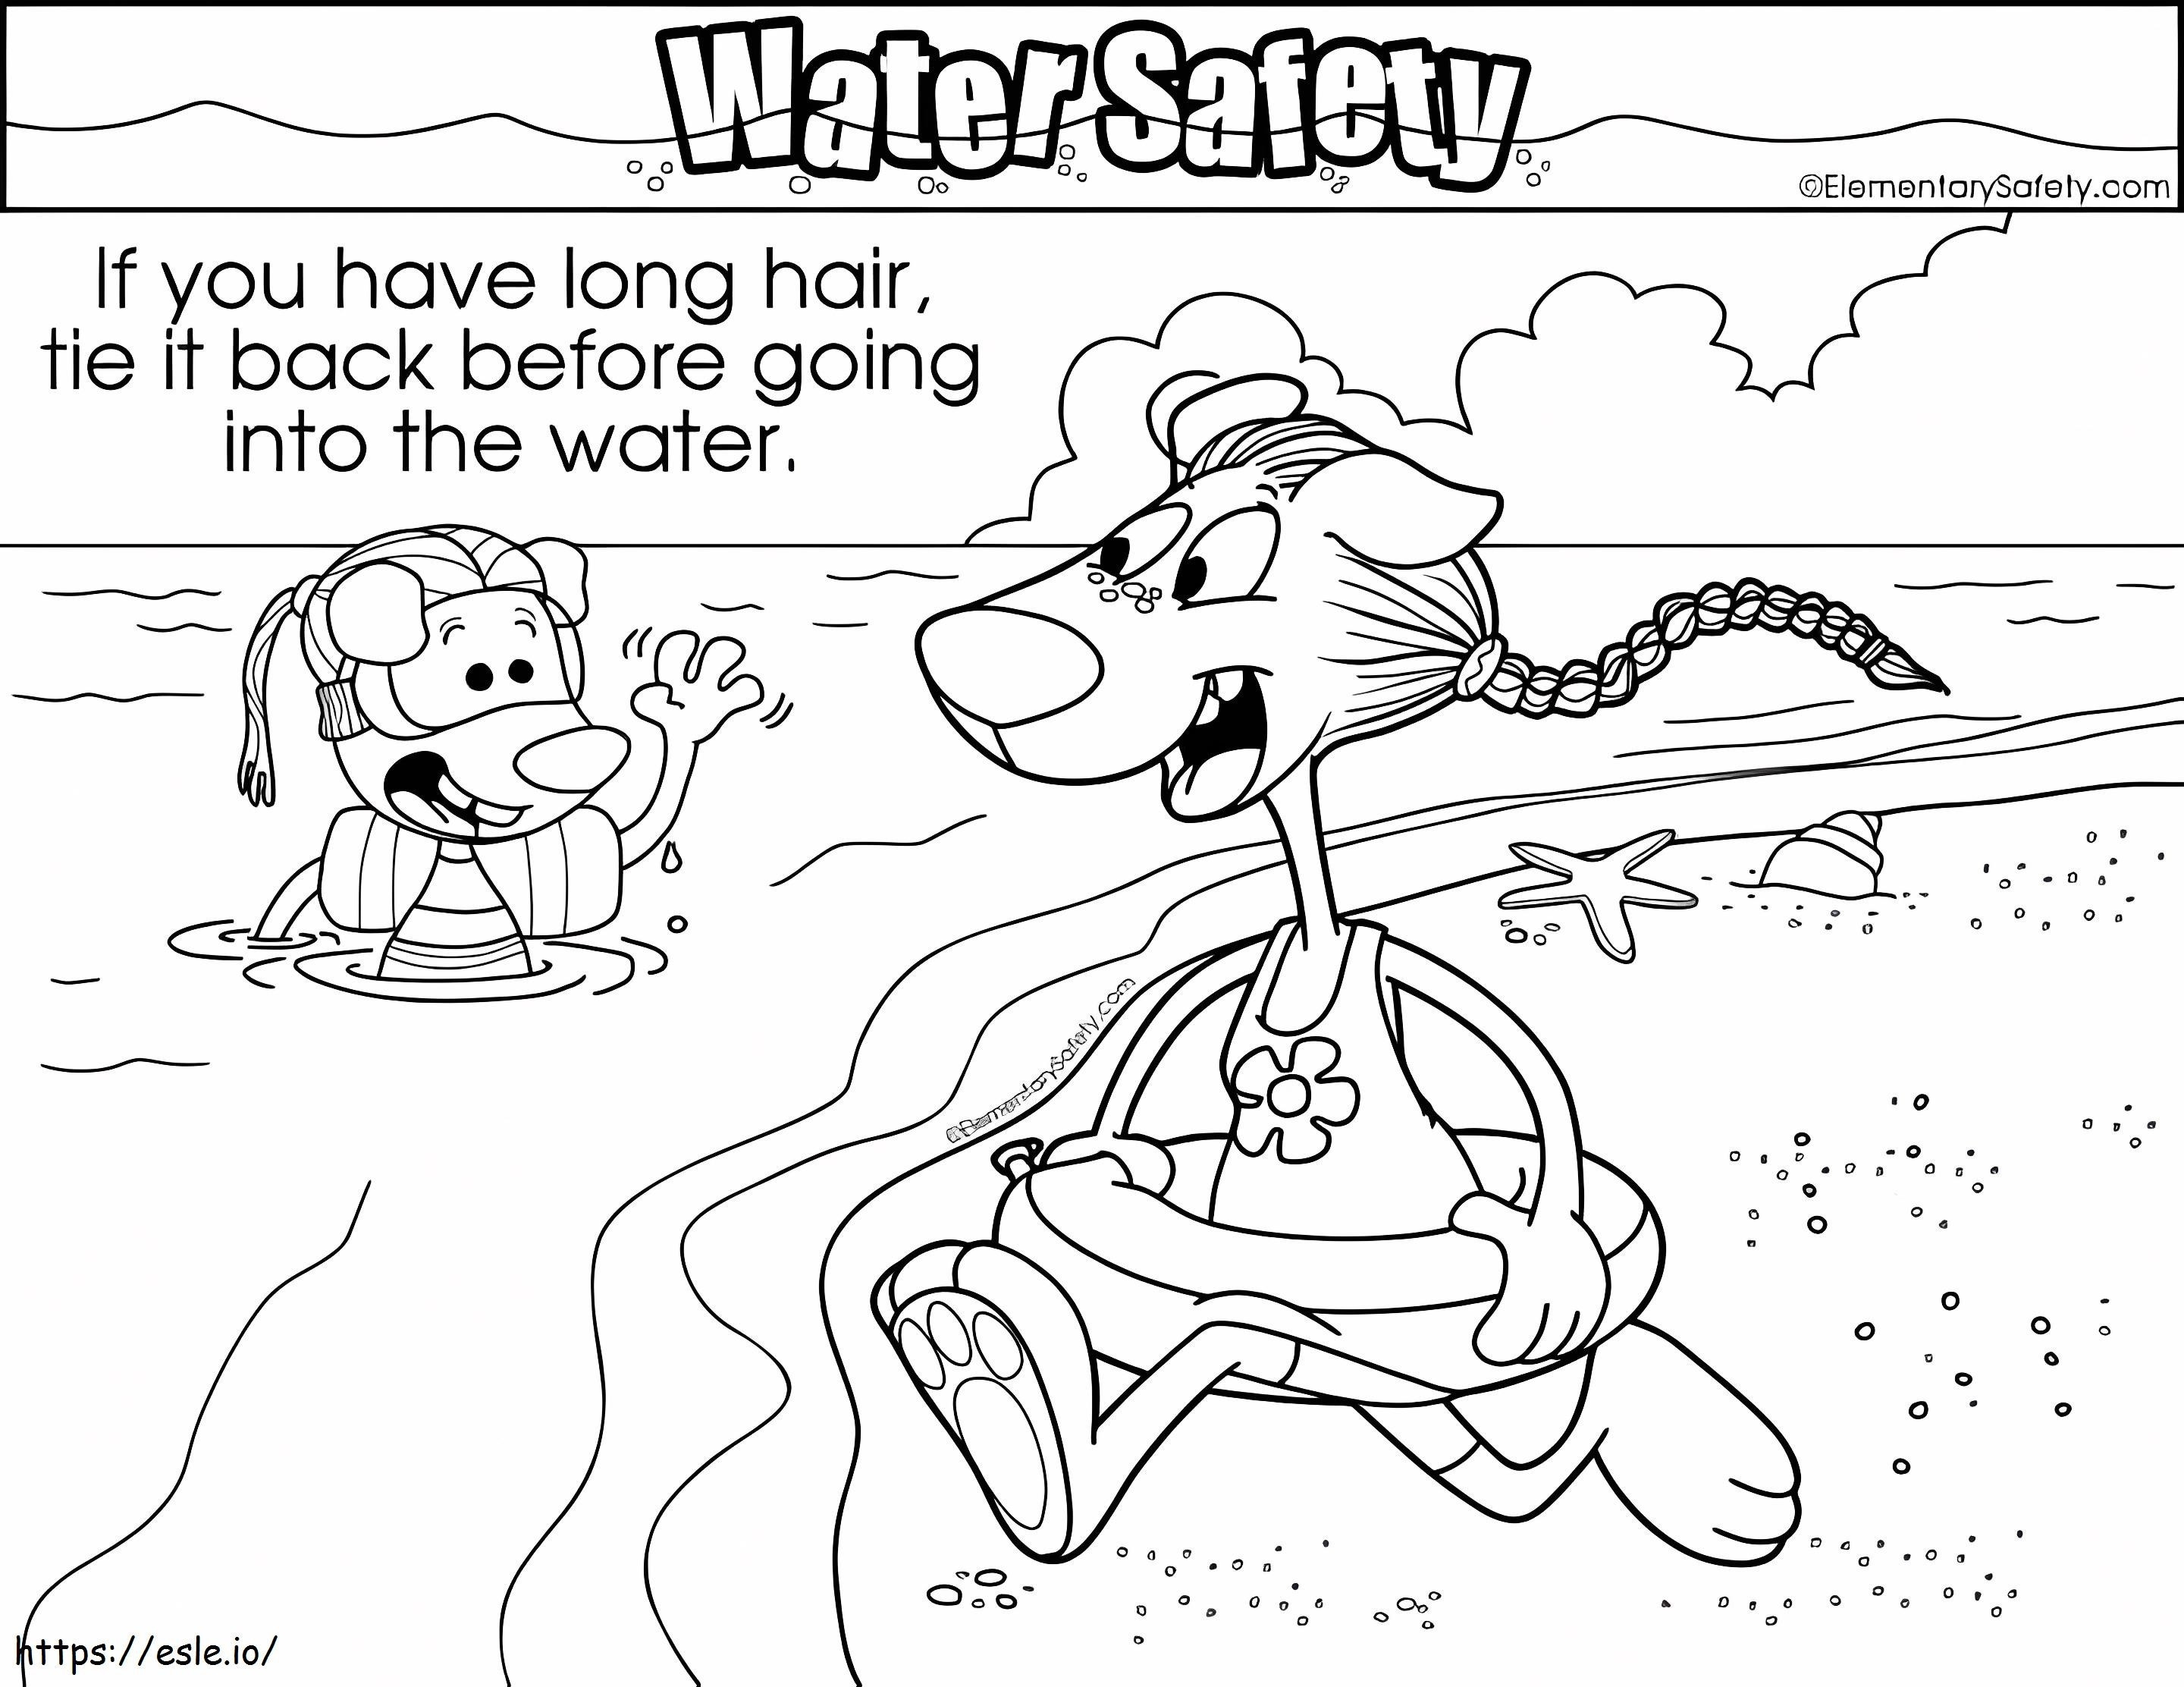 Tie Hair Before Swimming coloring page